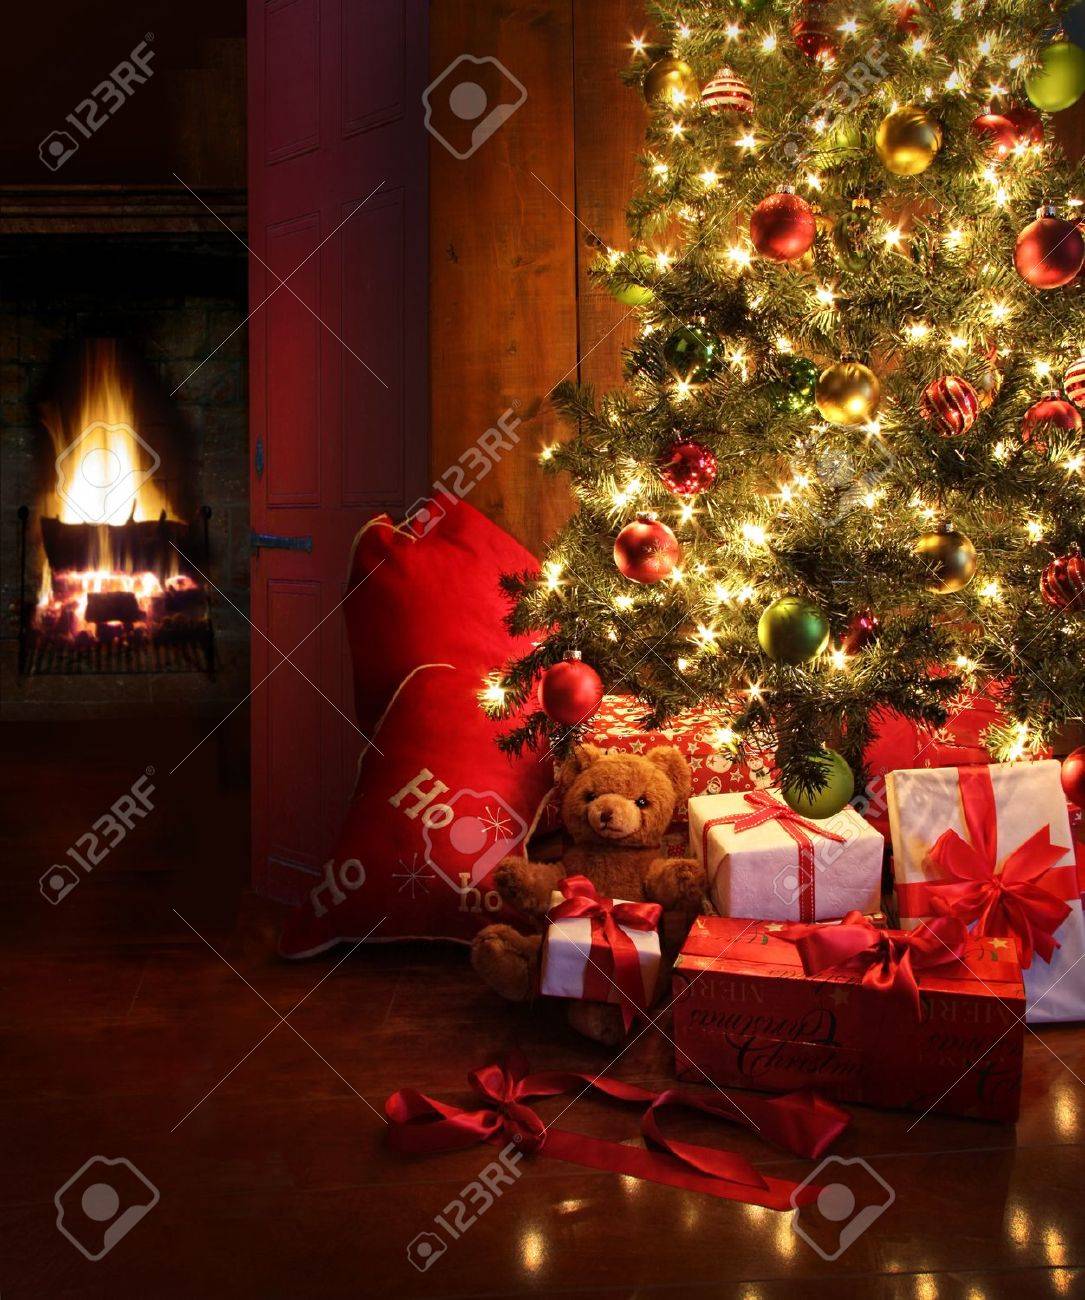 Christmas Scene With Tree Gifts And Fire In Background Stock Photo